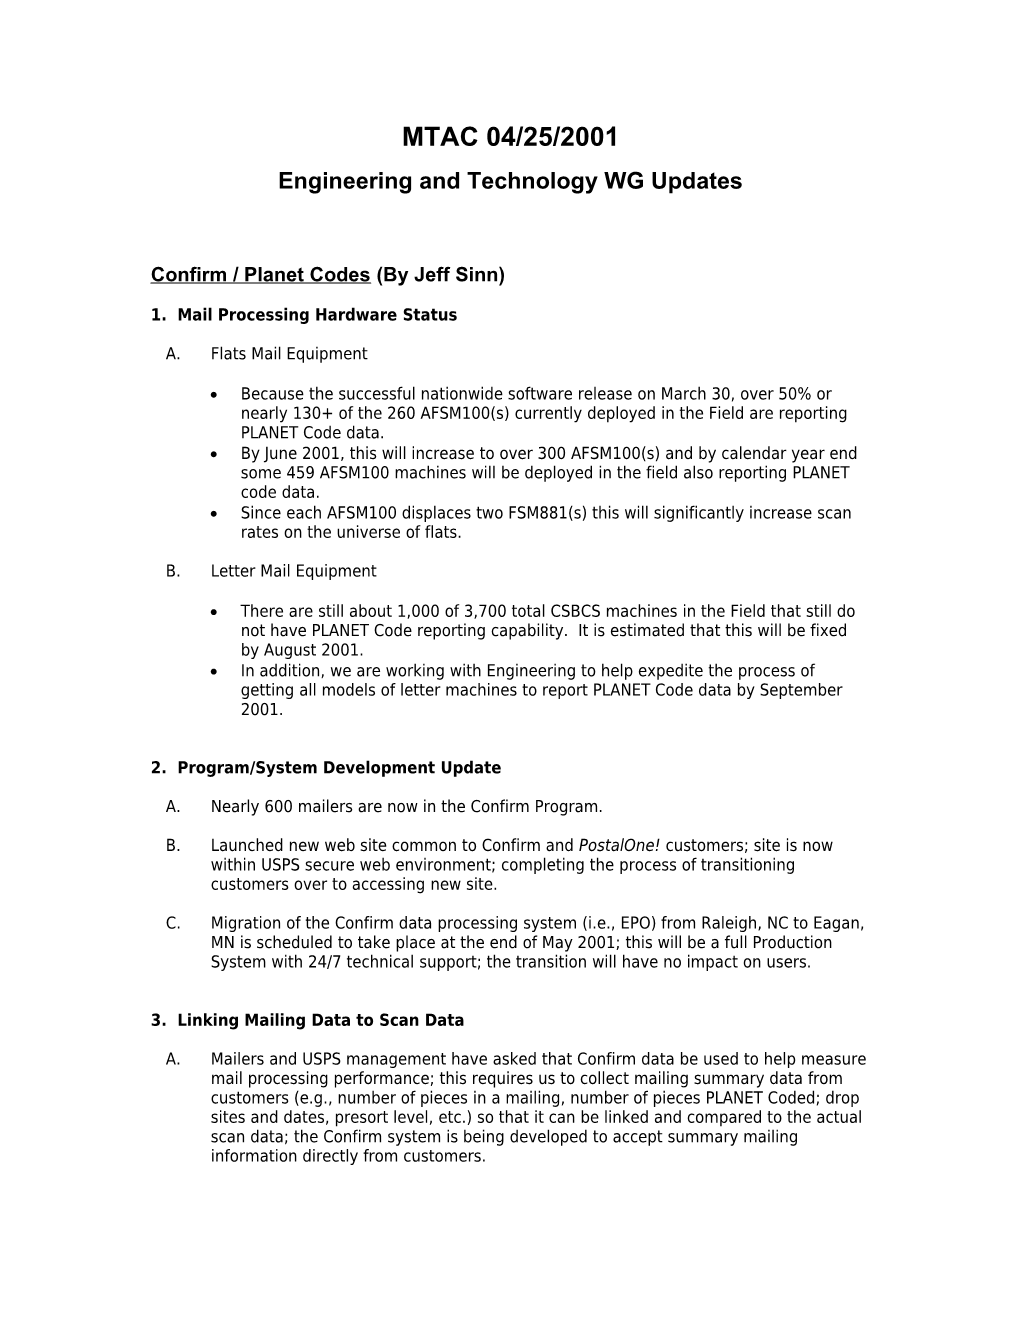 Engineering and Technology WG Updates